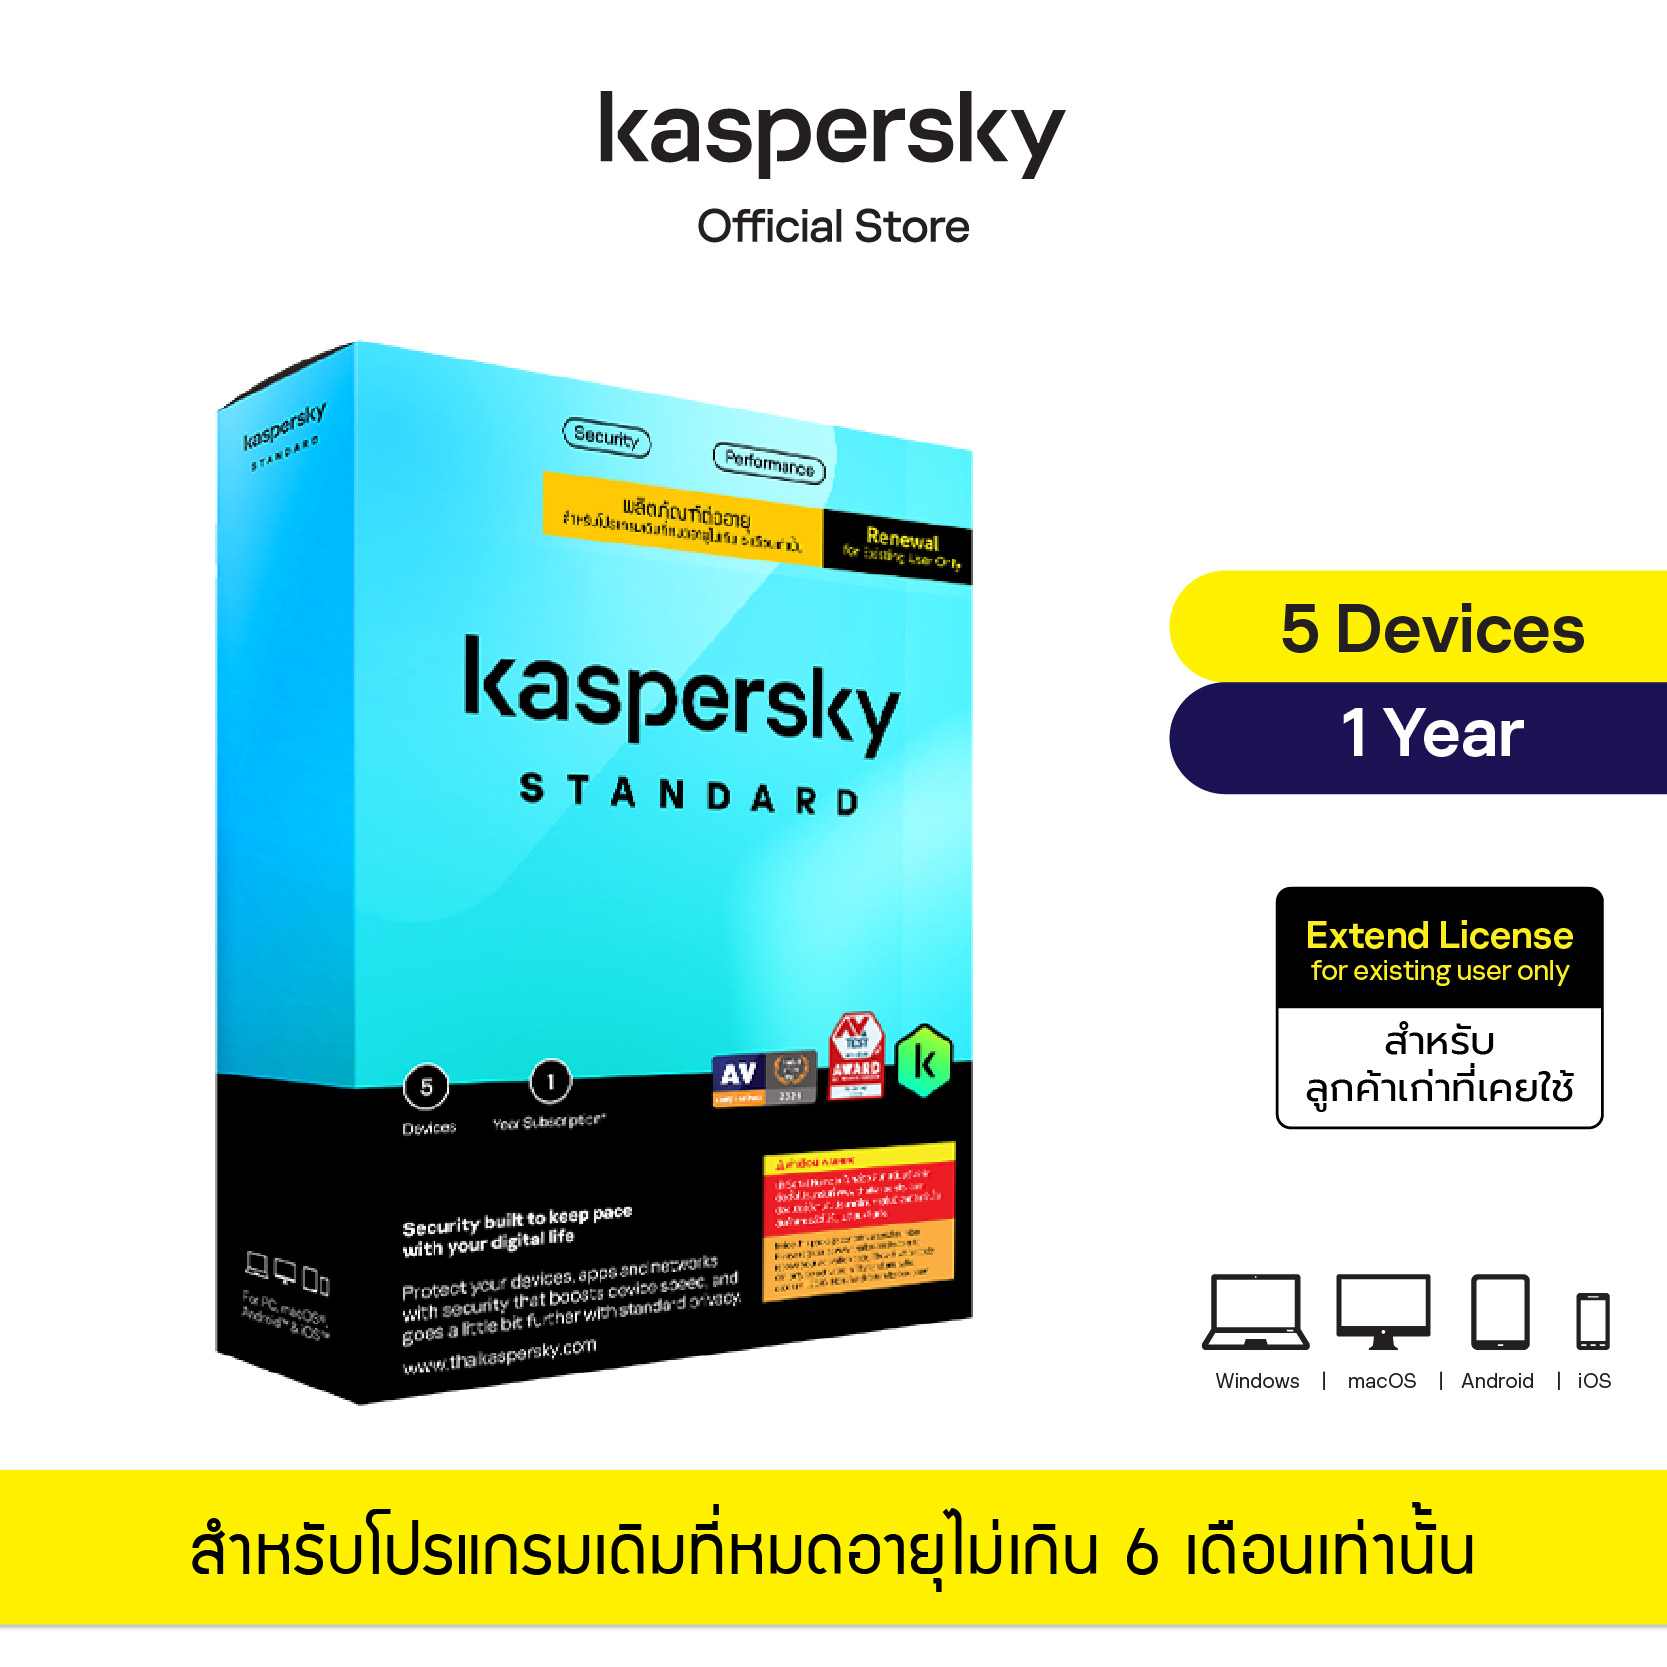 Kaspersky Standard 5 Devices 1 Year (License Extend)